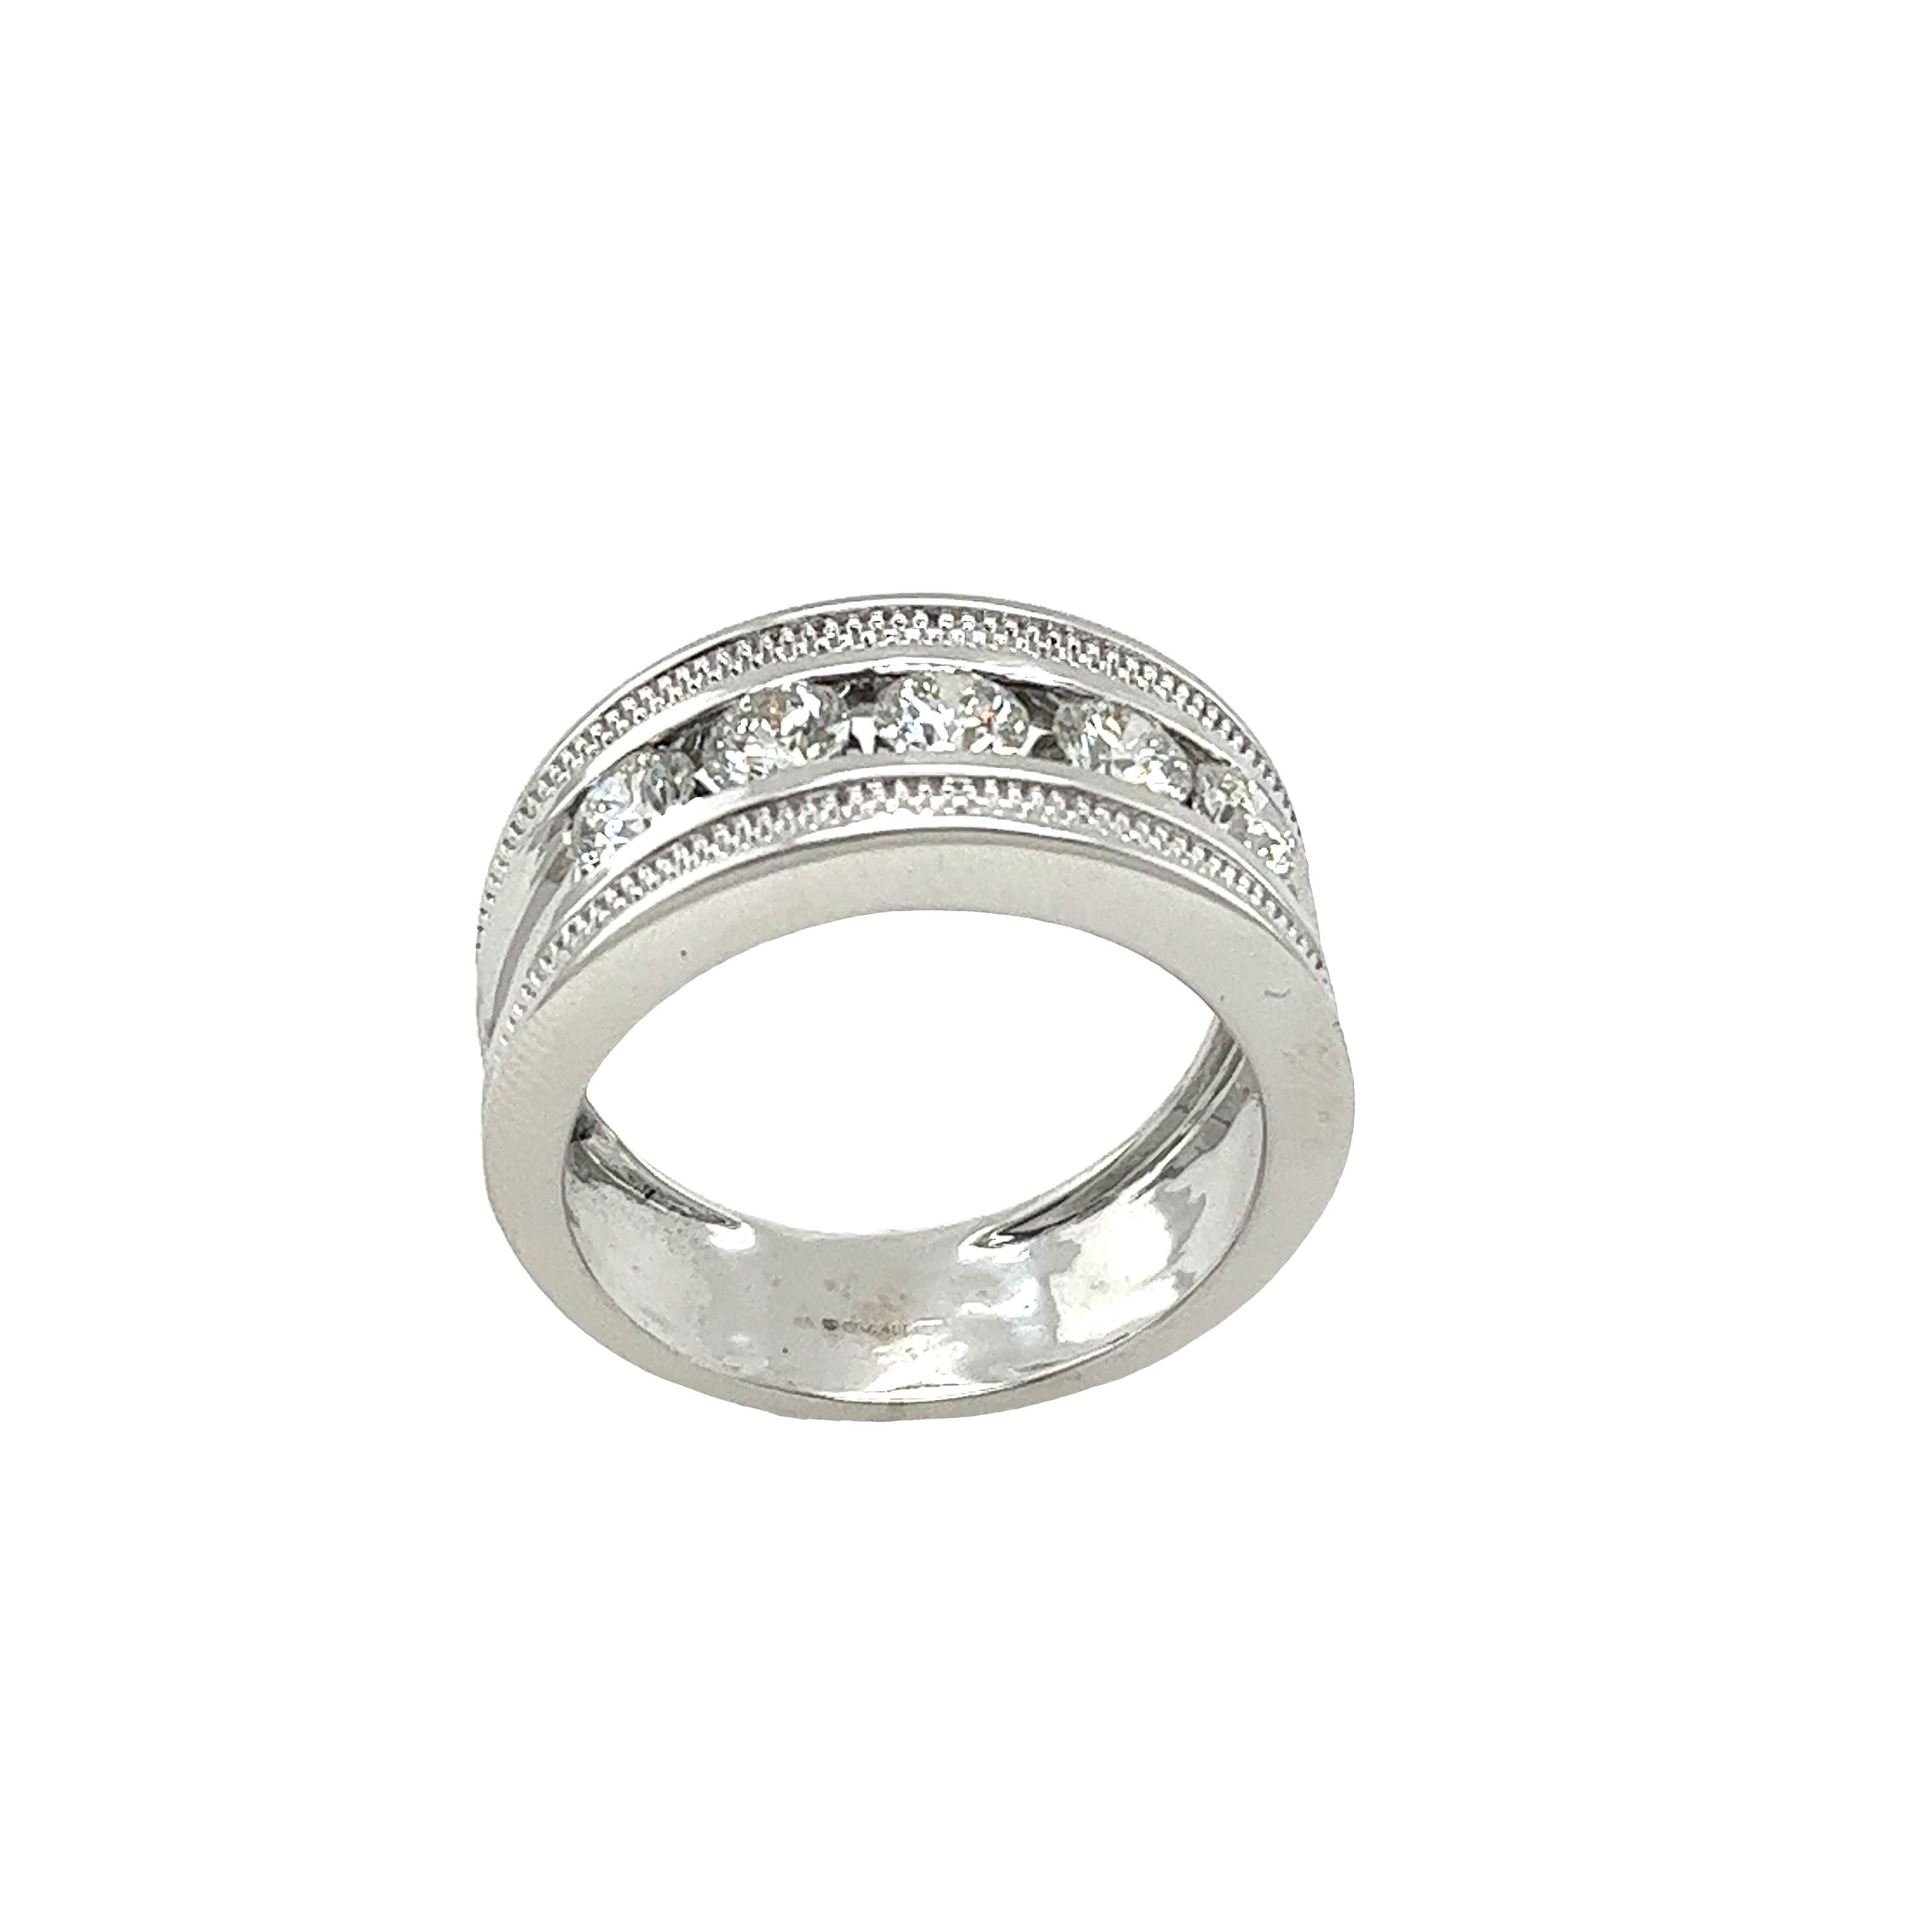 18ct White Gold 5 Stone Gia Diamond Ring, Set With 1.50ct G Colour IF clarity For Sale 4